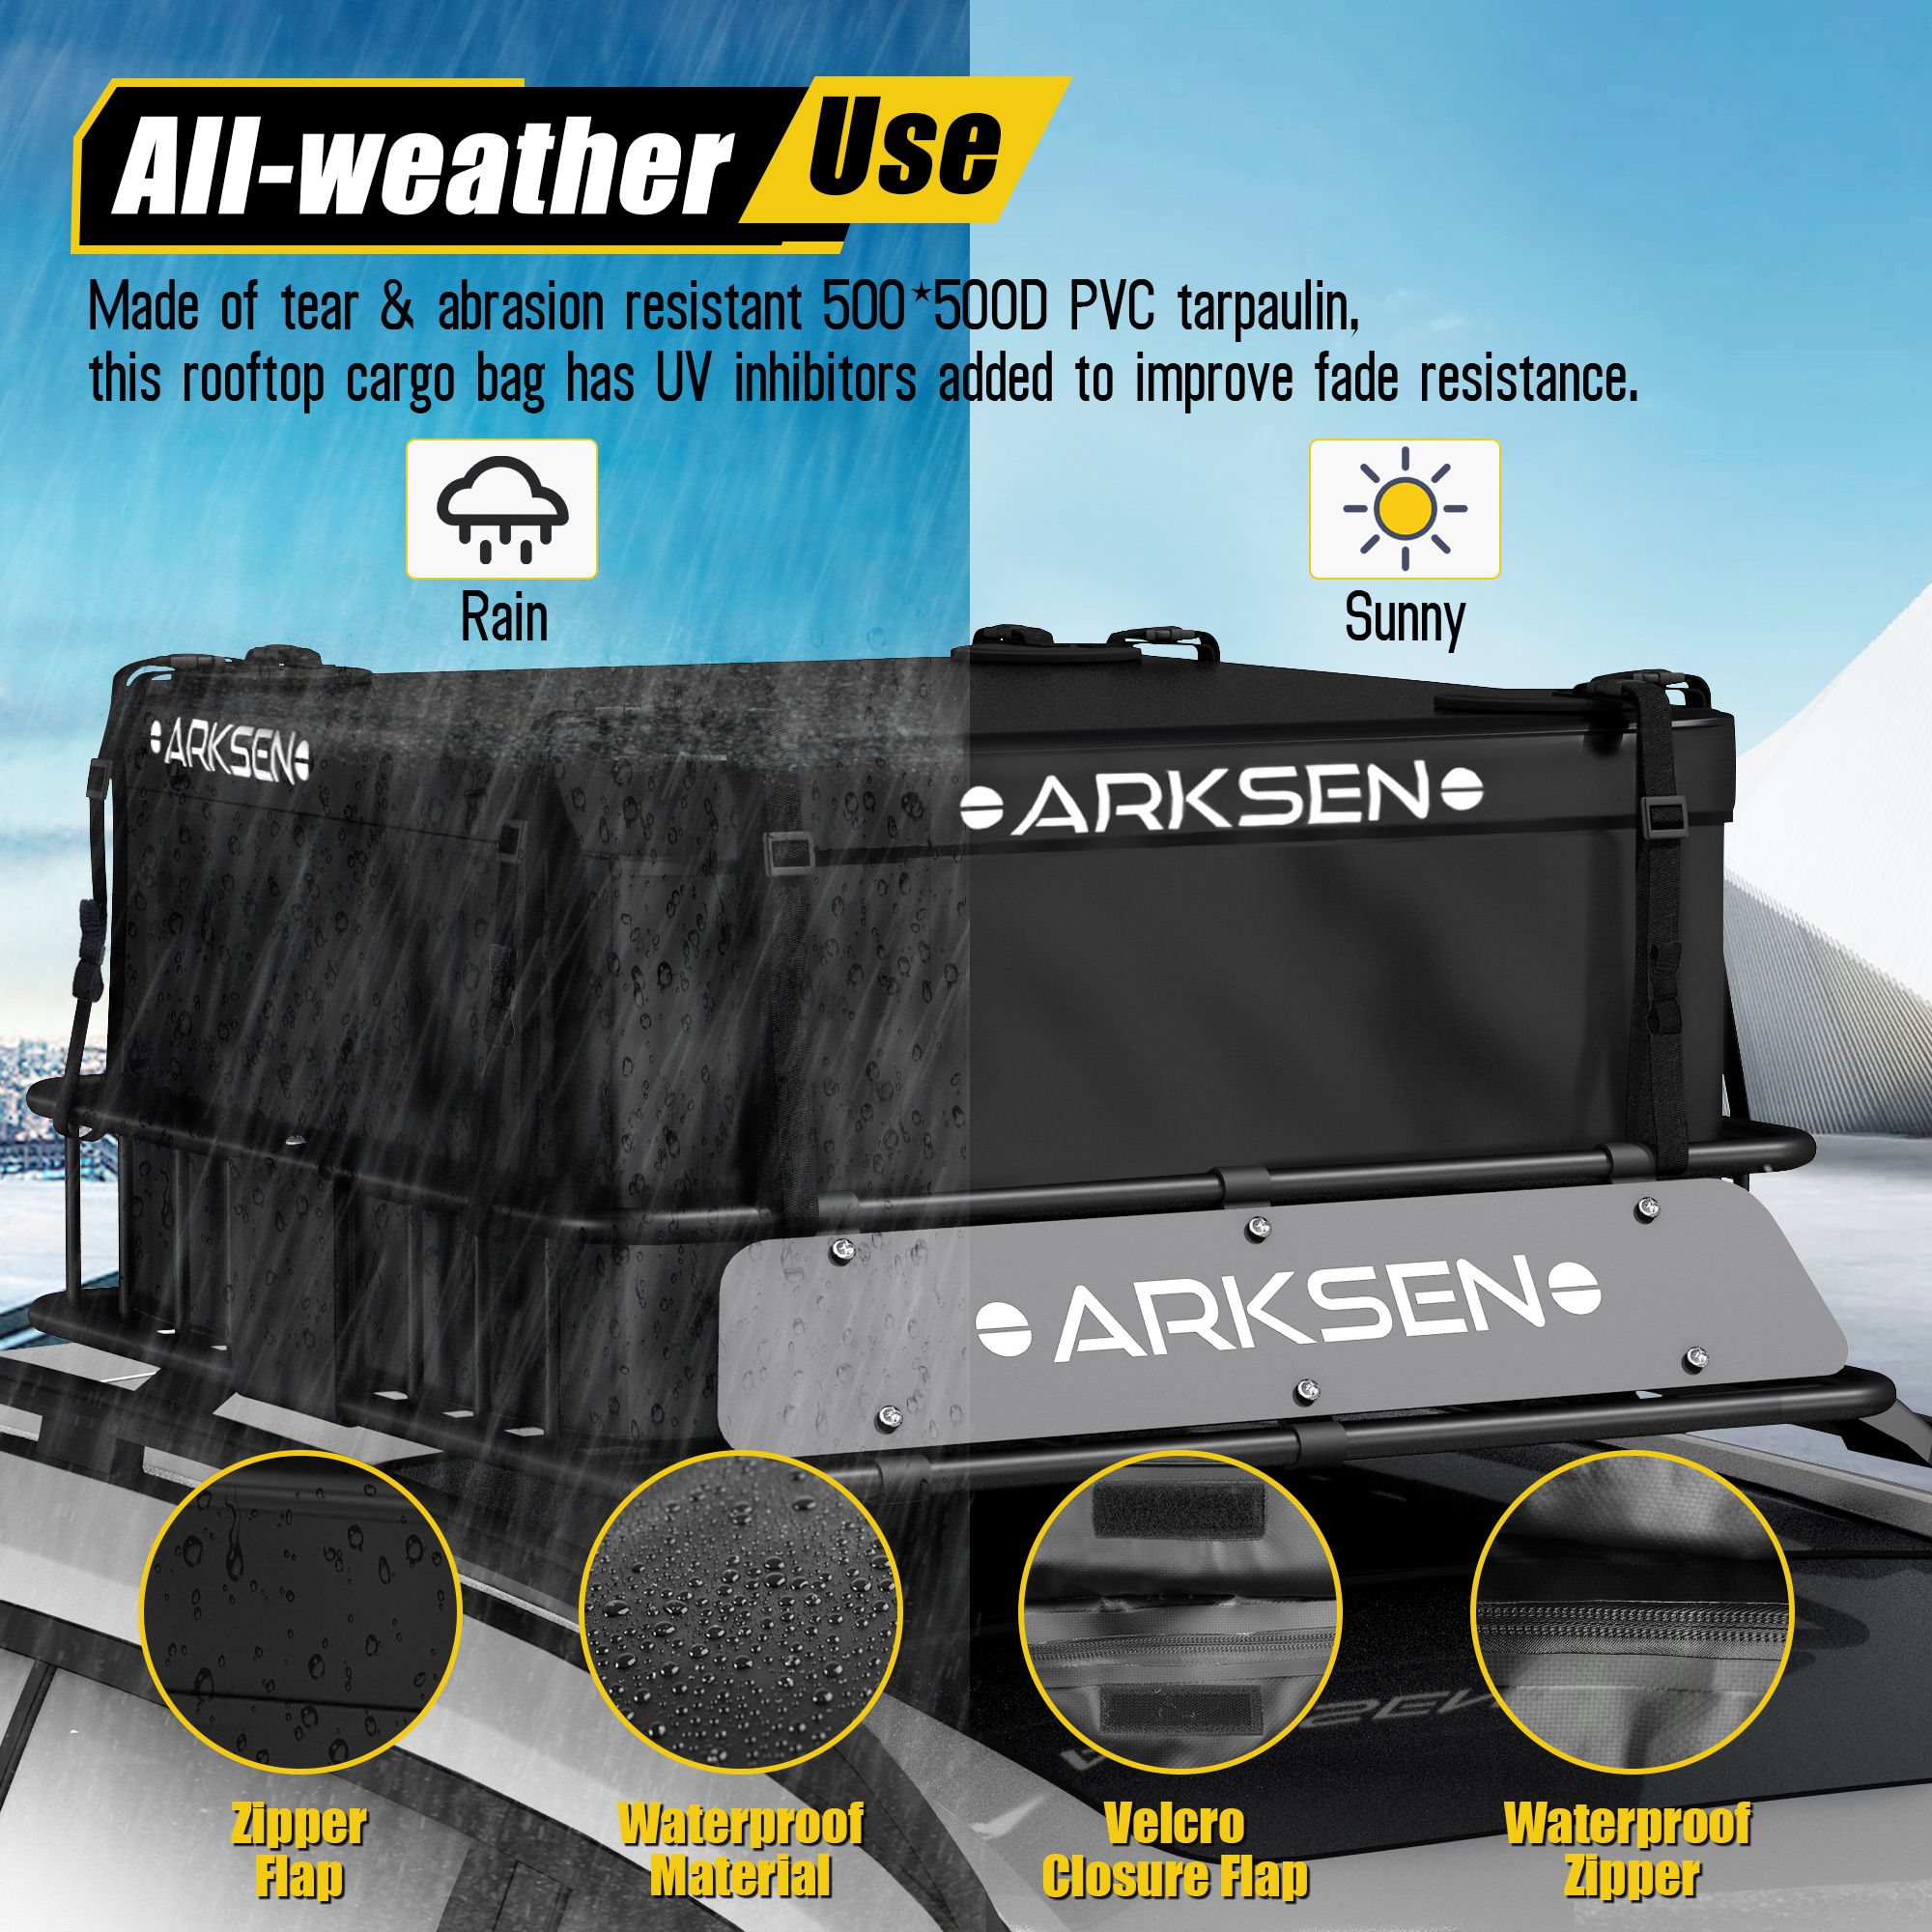 ARKSEN 64 x 39 Inch Universal 150LB Heavy Duty Roof Rack Cargo with Extension Car Top Luggage Holder Carrier Basket for SUV, Truck, ＆ Car Steel Const - 2